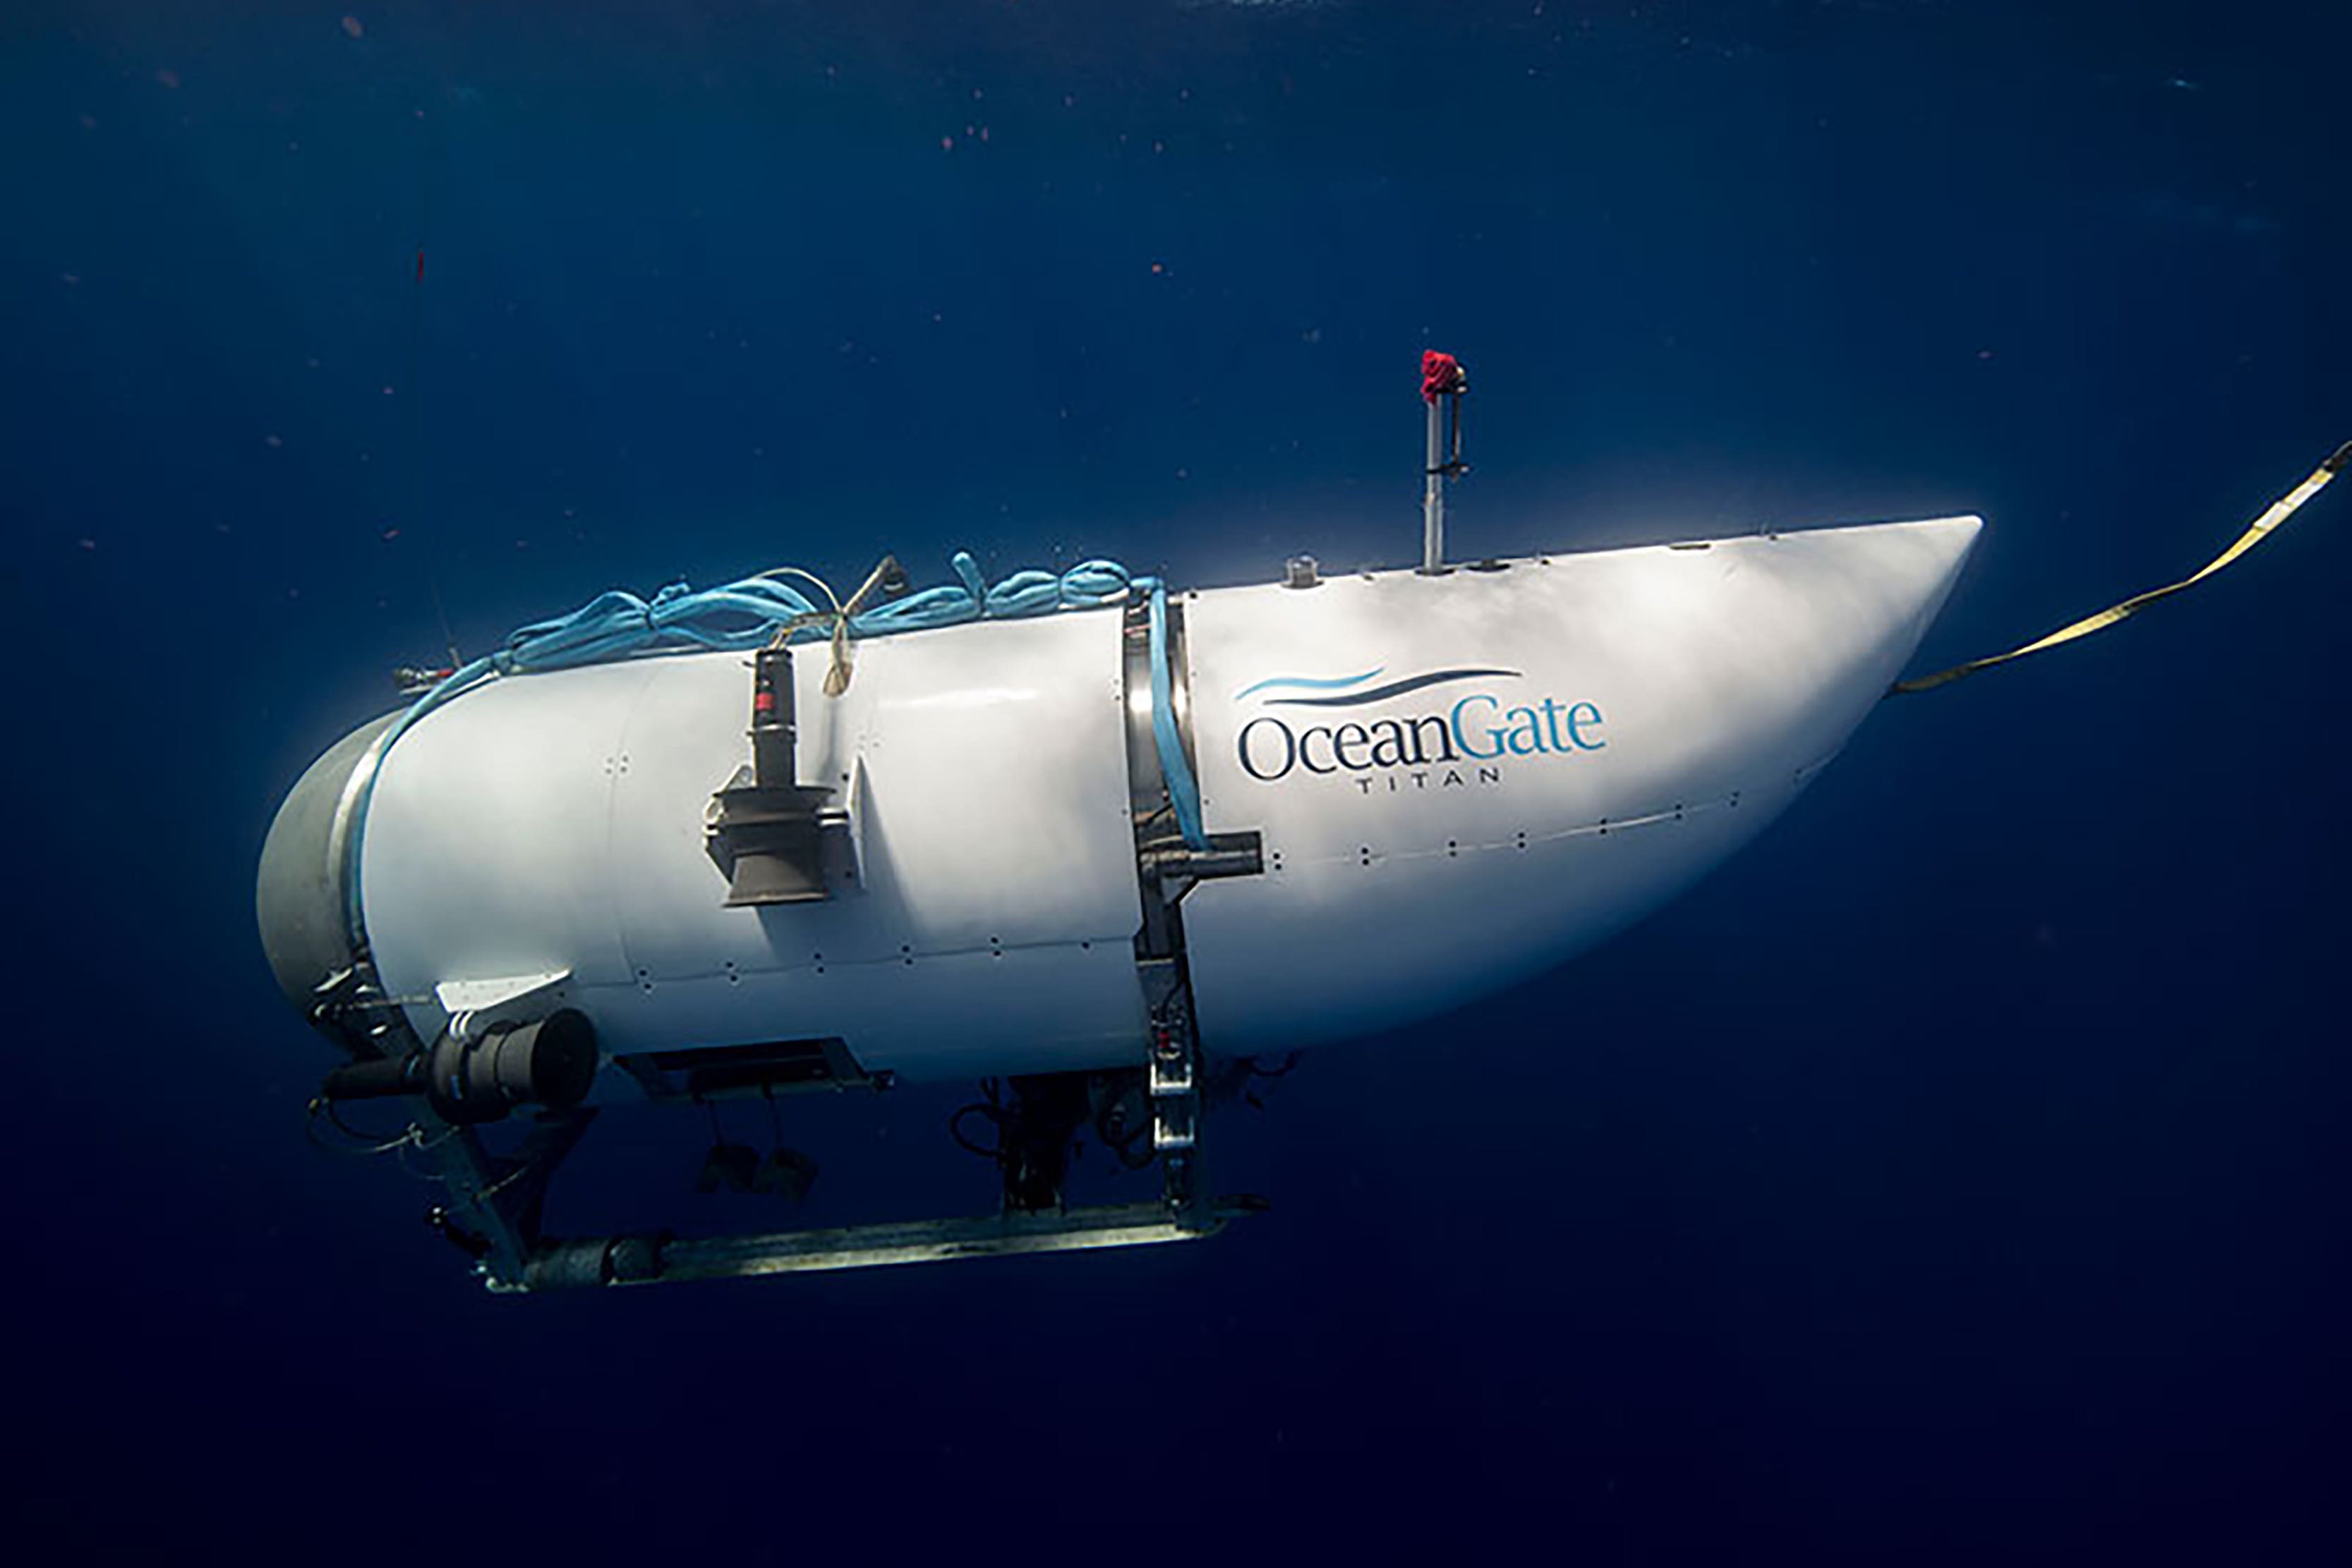 The submersible vessel named Titan